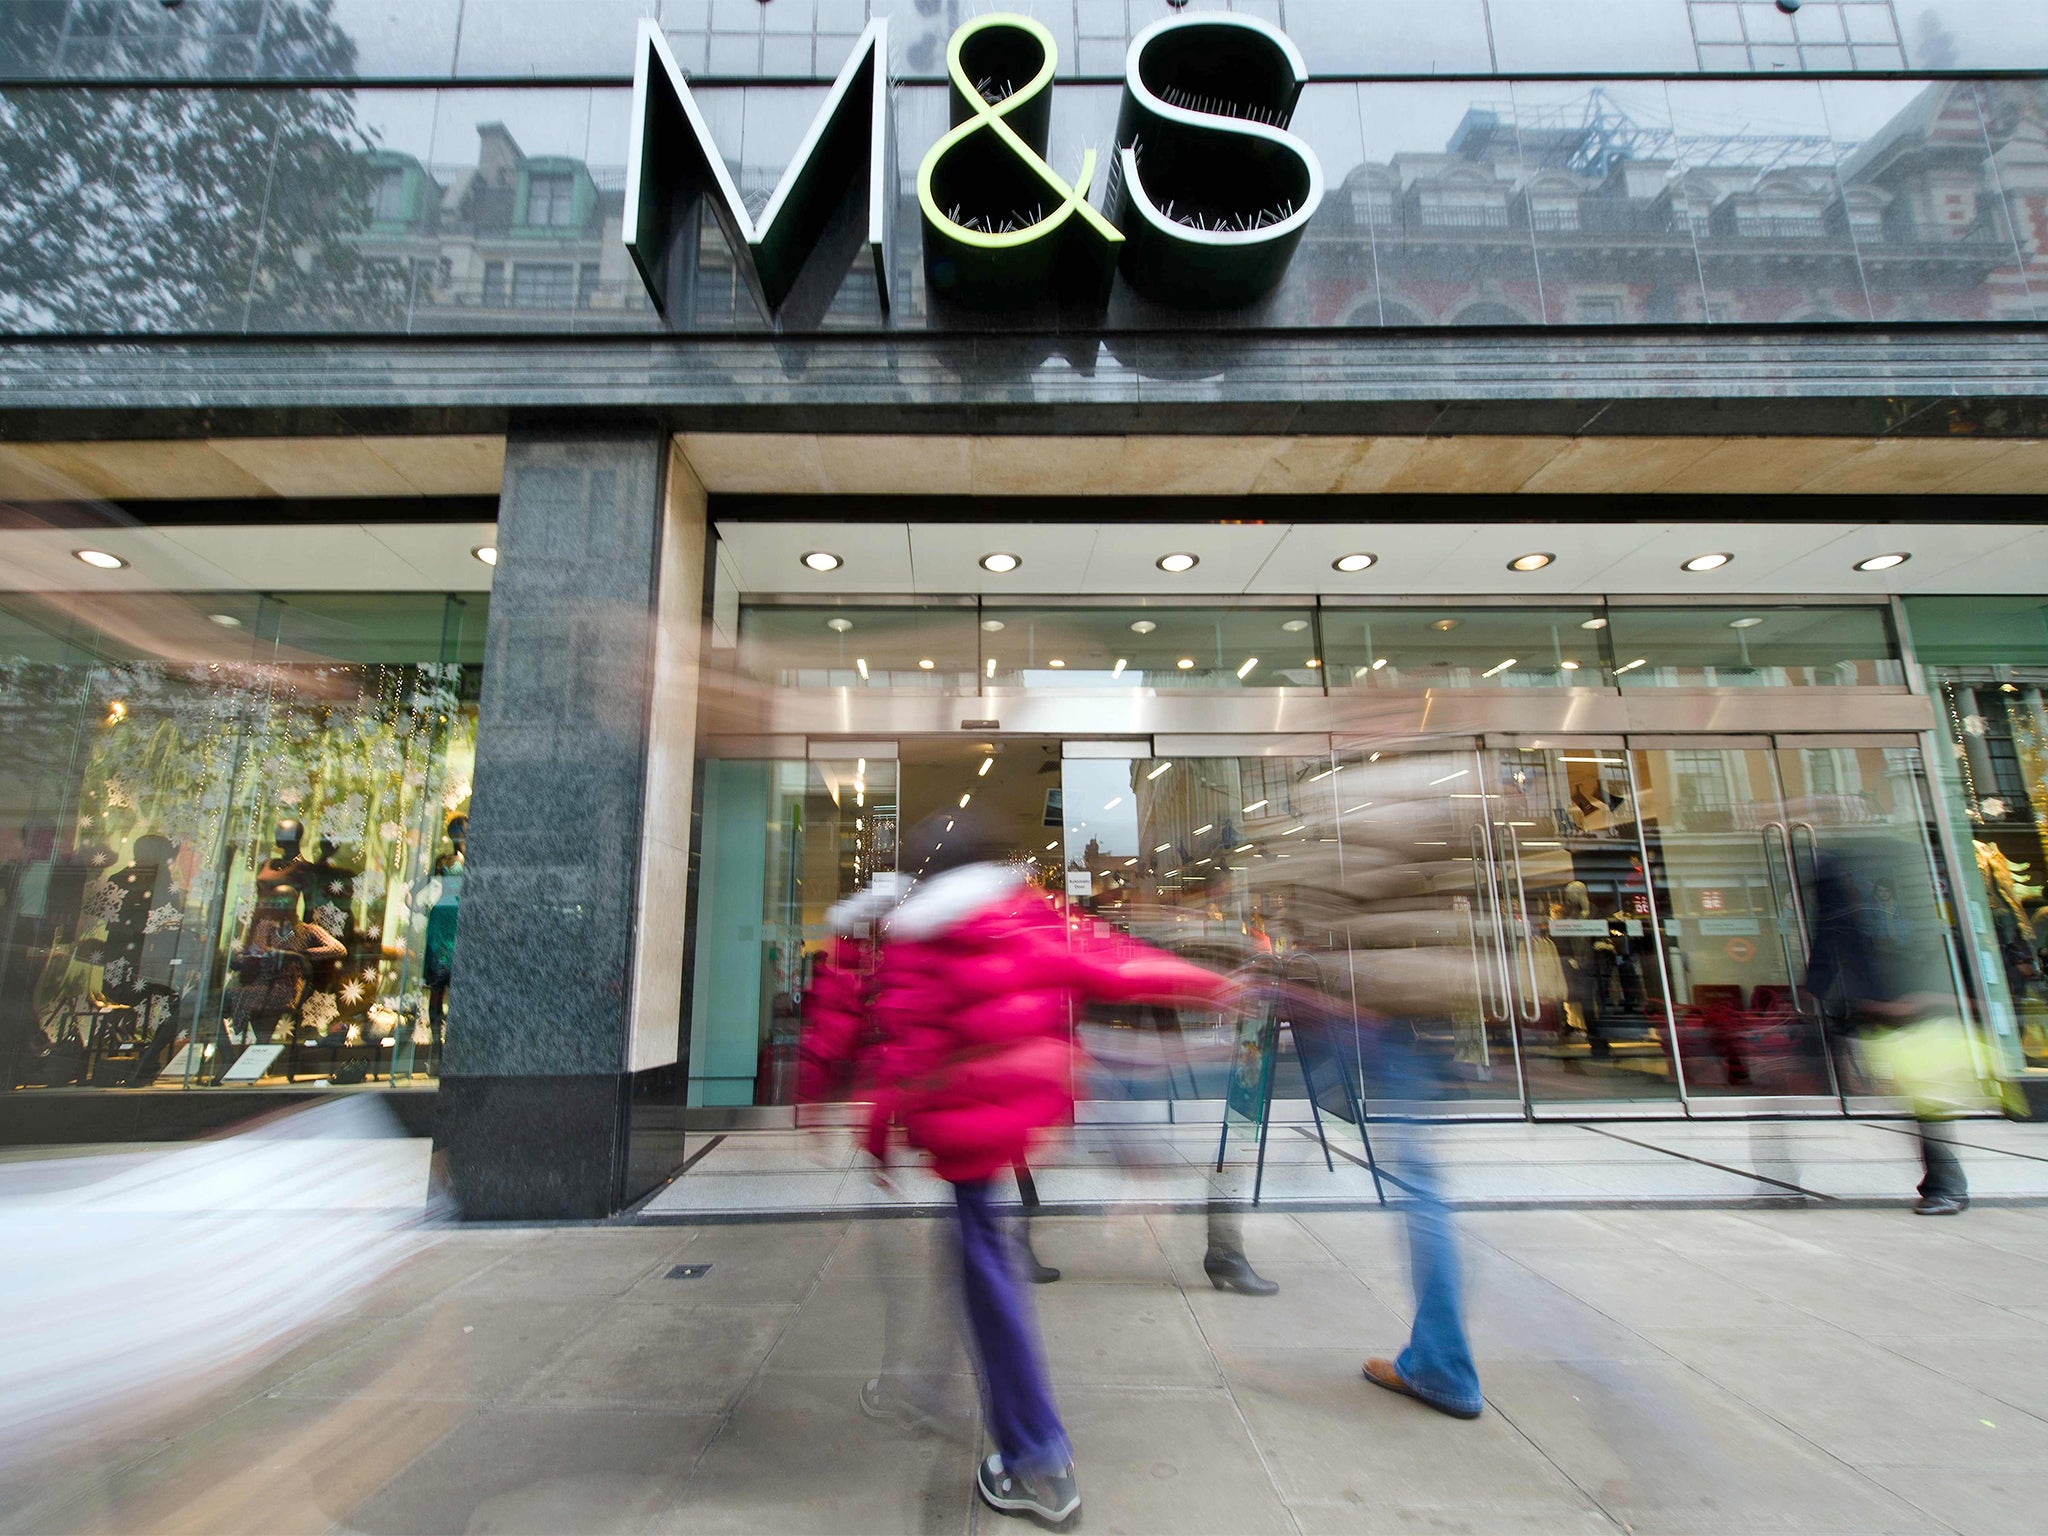 Sales at the Clothing & Home division at M&S were down by nearly 9%